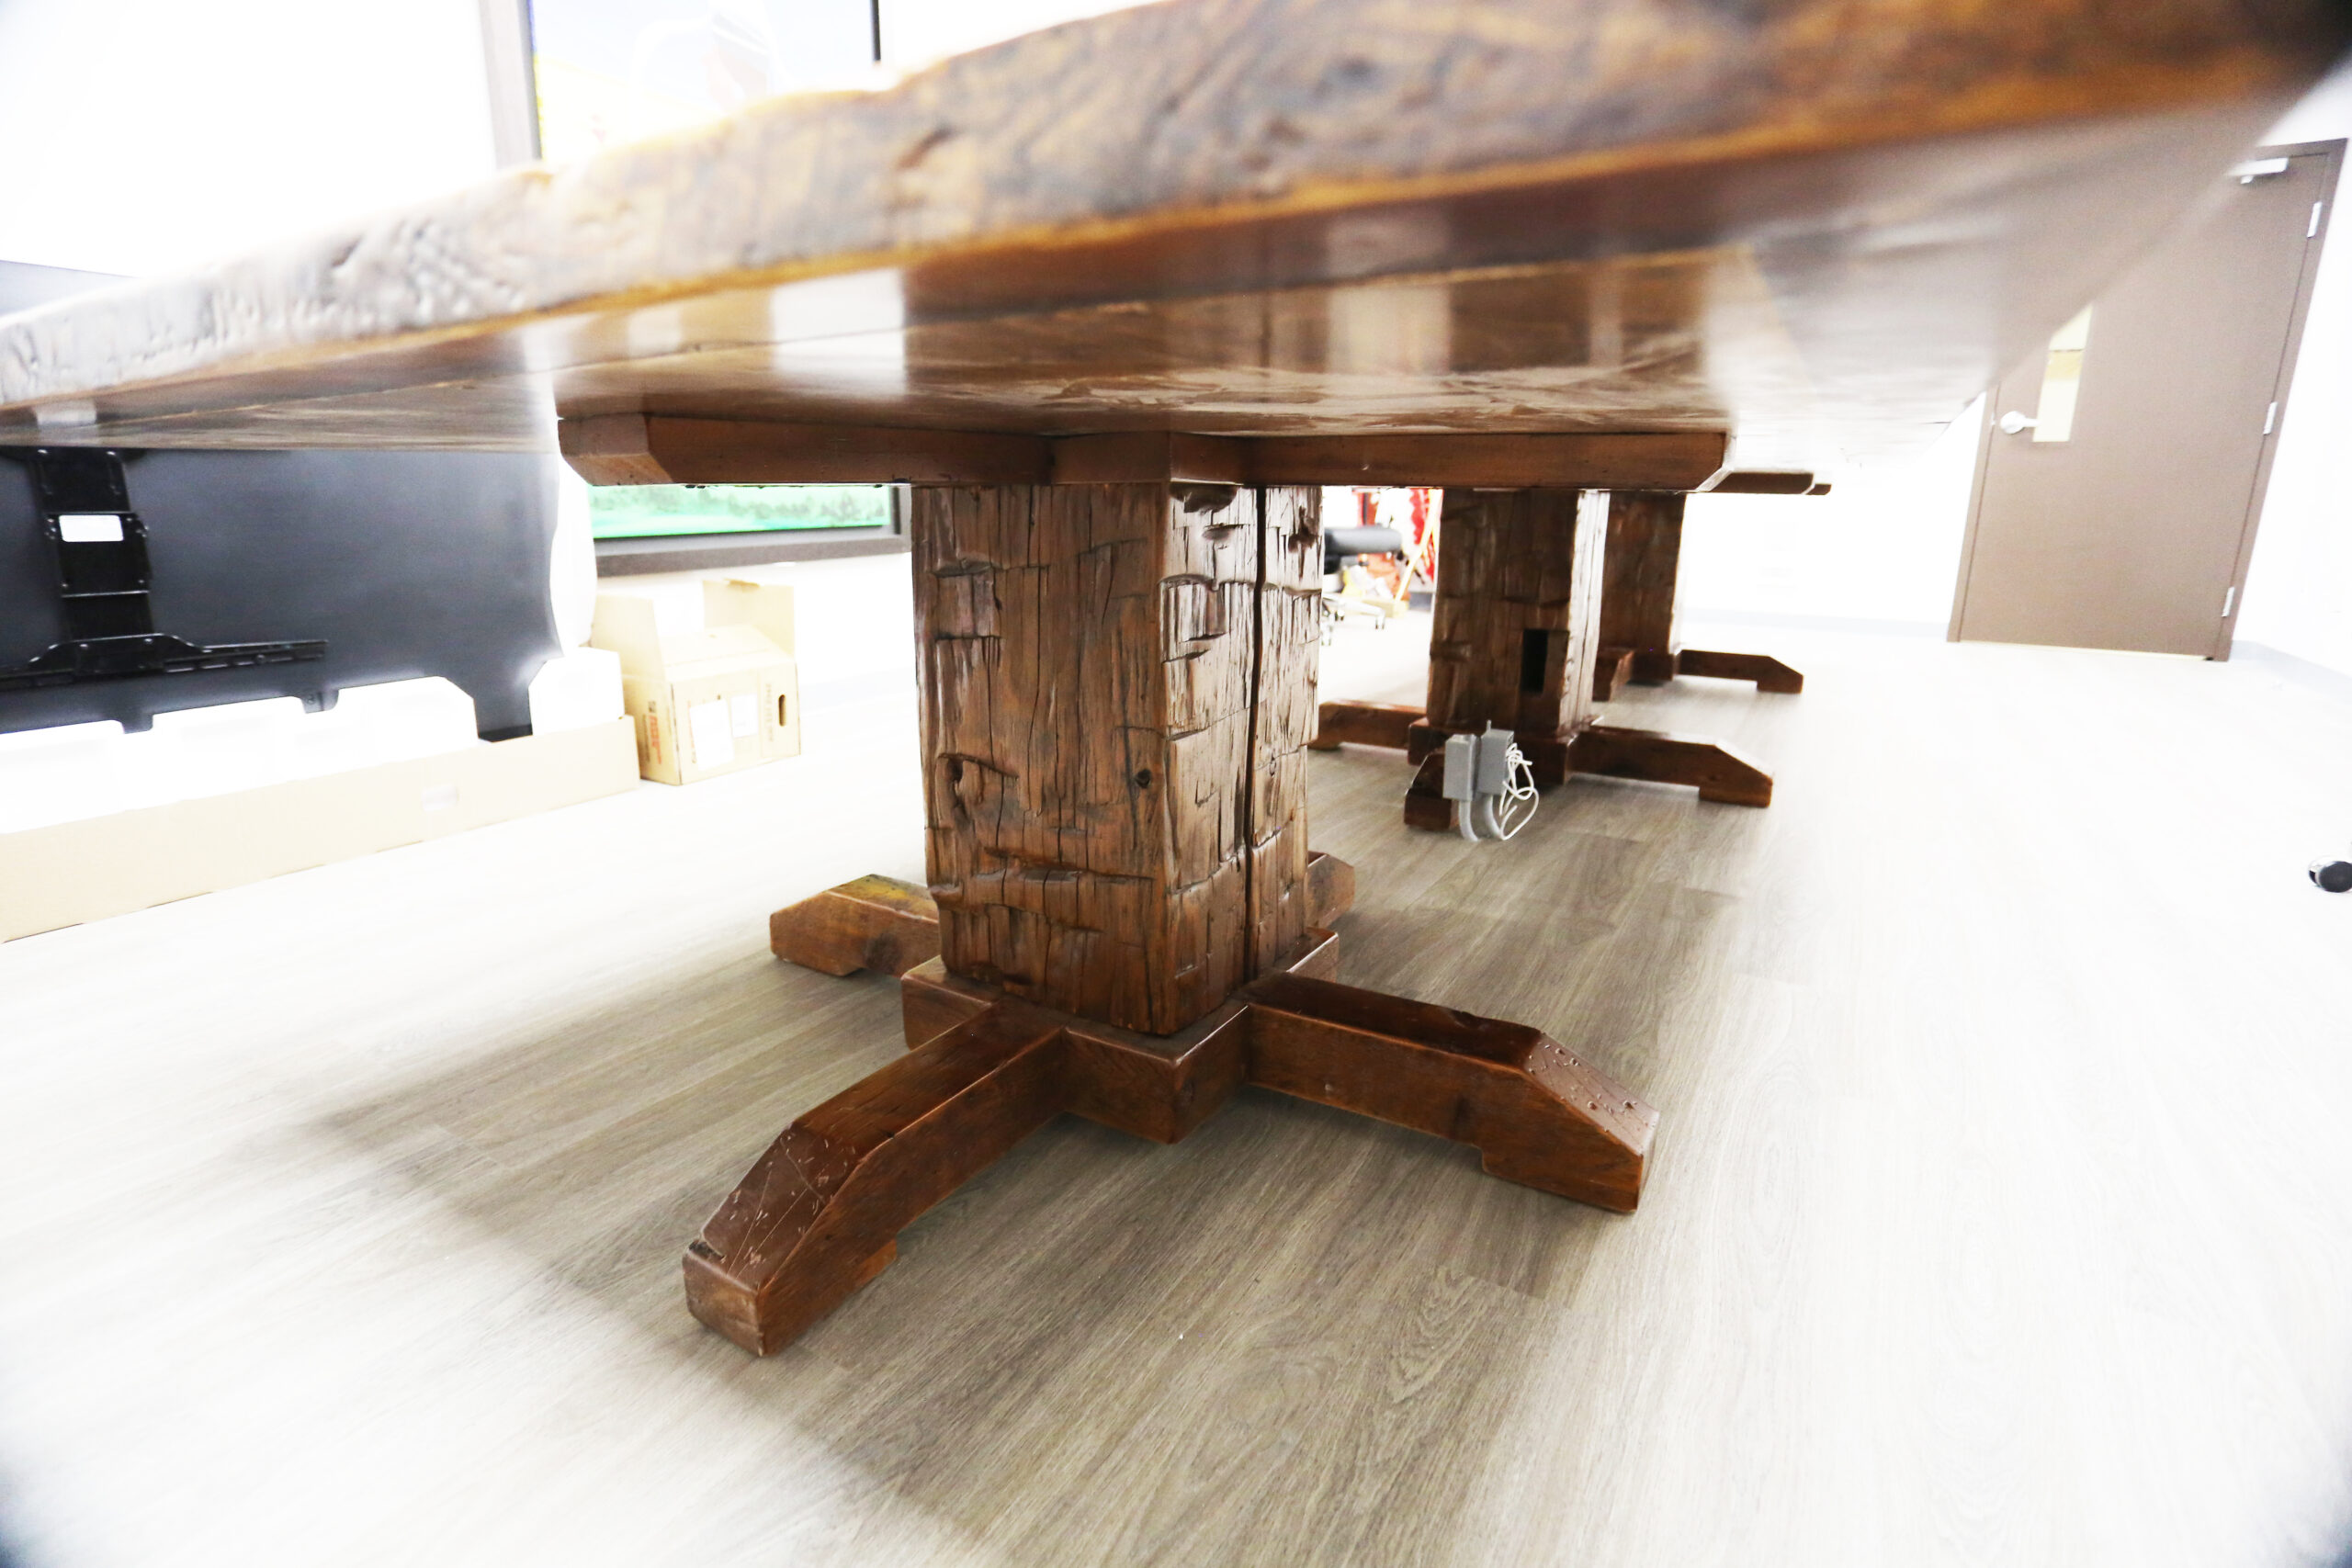 Project details: 17’ Reclaimed Ontario Barnwood Table we made for a Marathon, Ontario community centre – Hand-Hewn Beam Pedestals Base - Old Growth Hemlock Threshing Floor Construction – Original edges & distressing maintained – Bread Edge Ends – Custom Steel Graphic Embedded - Premium epoxy + satin polyurethane finish – Top Built in 3 parts / Onsite Final Assembly - www.table.ca